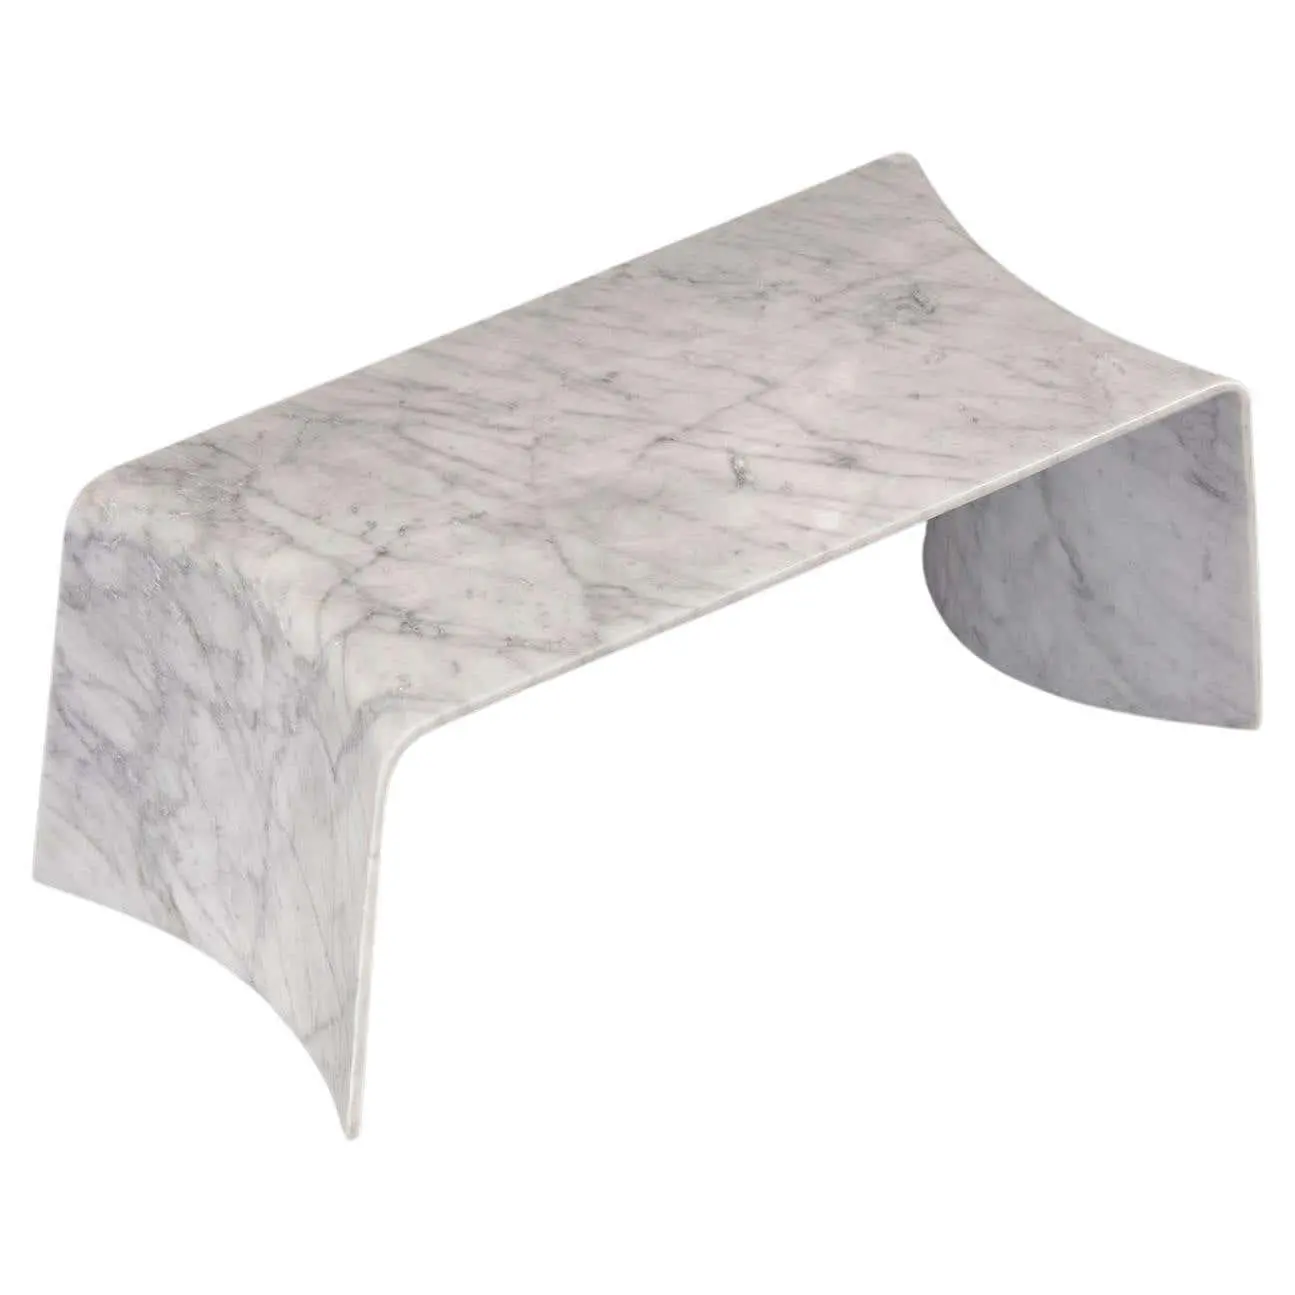 Art Deco Modern Marble Small Coffee Tables For Living Room Modern Folio Rectangle Table in Carrara Marble